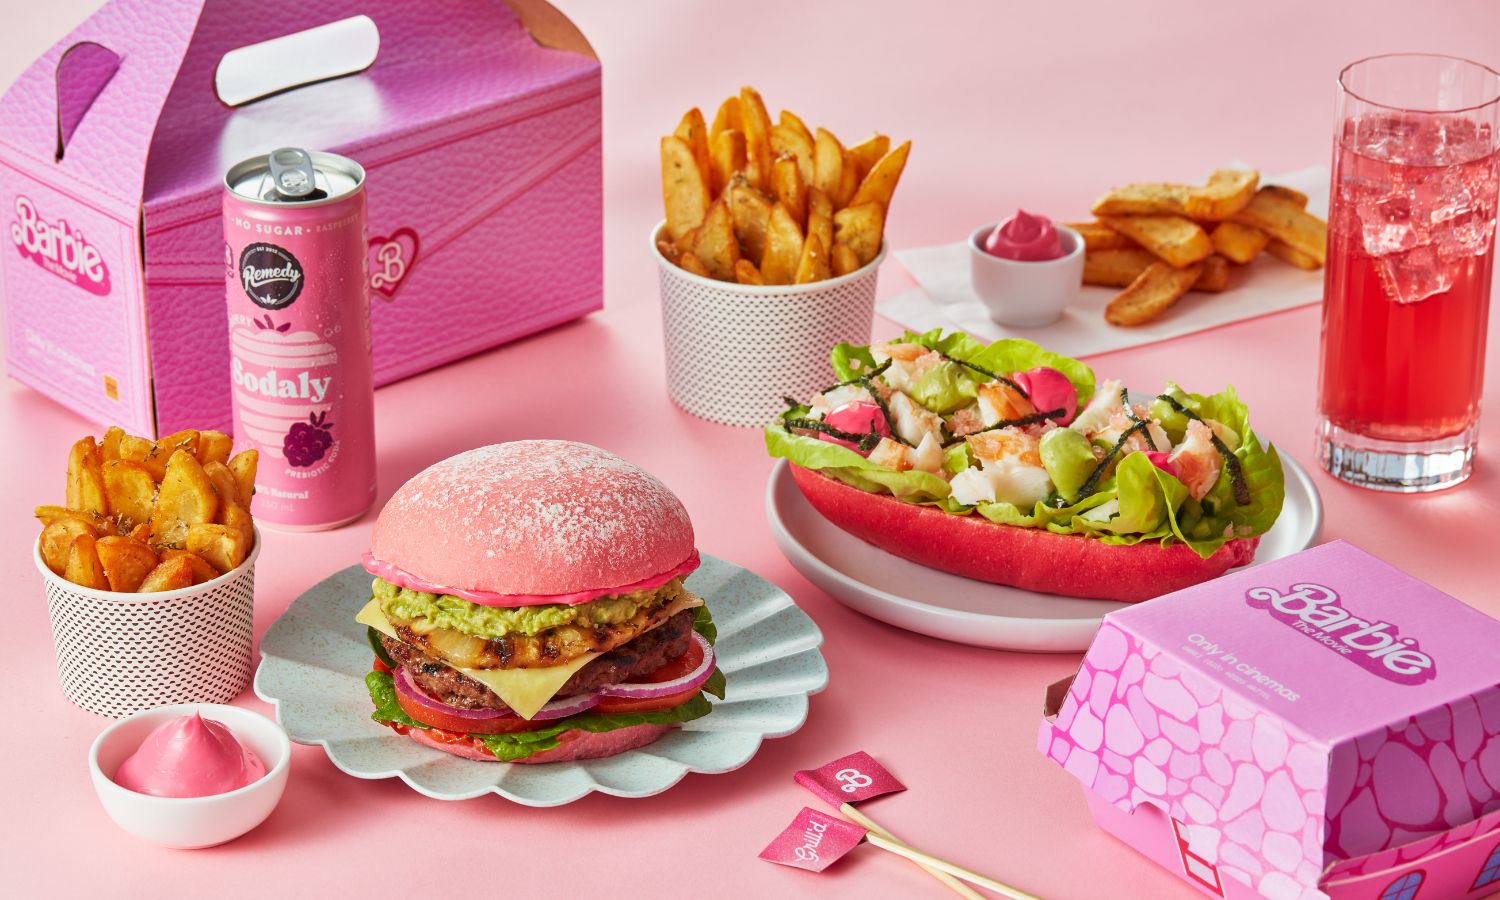 Burger King Launches Pink Barbie Inspired Menu Items Hey News 9535